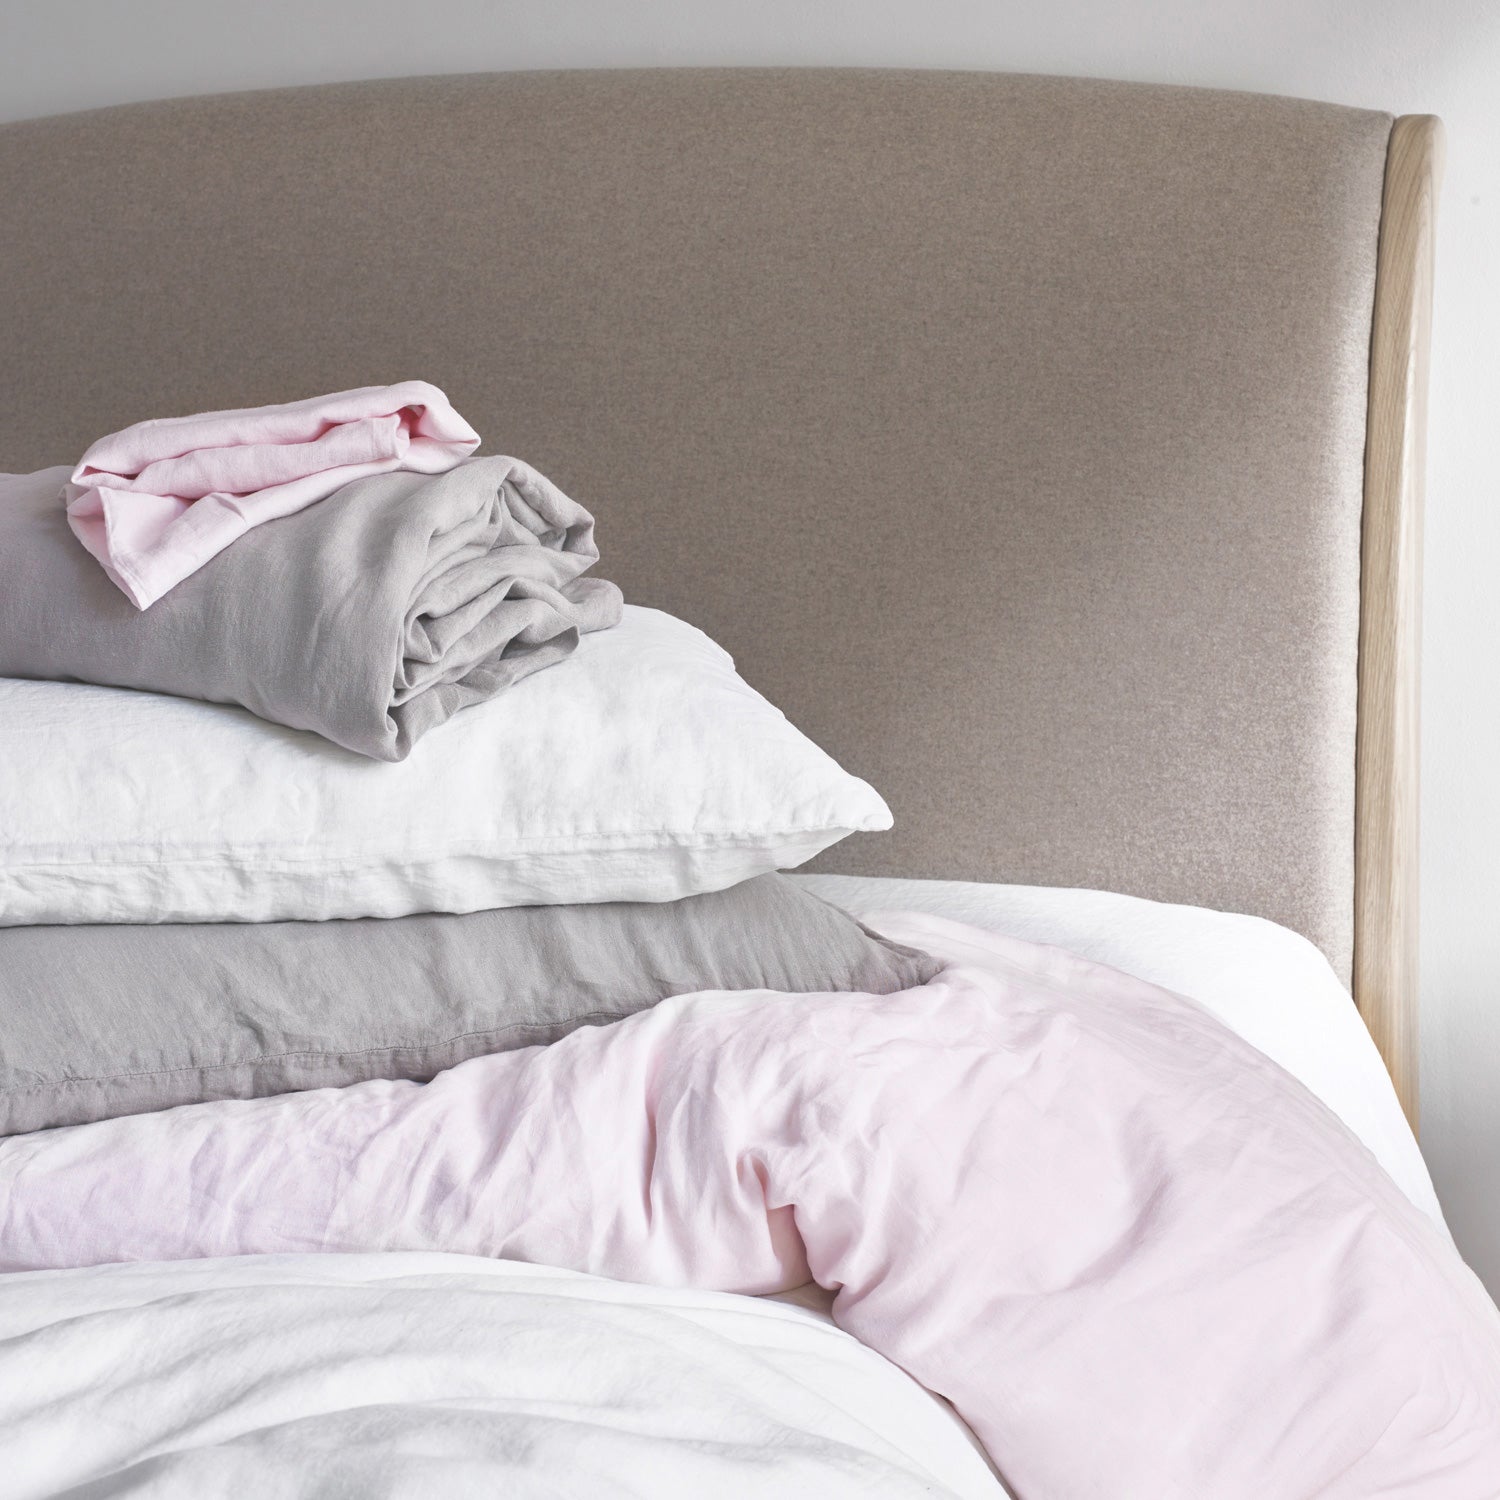 Pile of Freshly Cleaned Linen Bed Sheets and Pillowcases in White, Pink and Grey | scooms